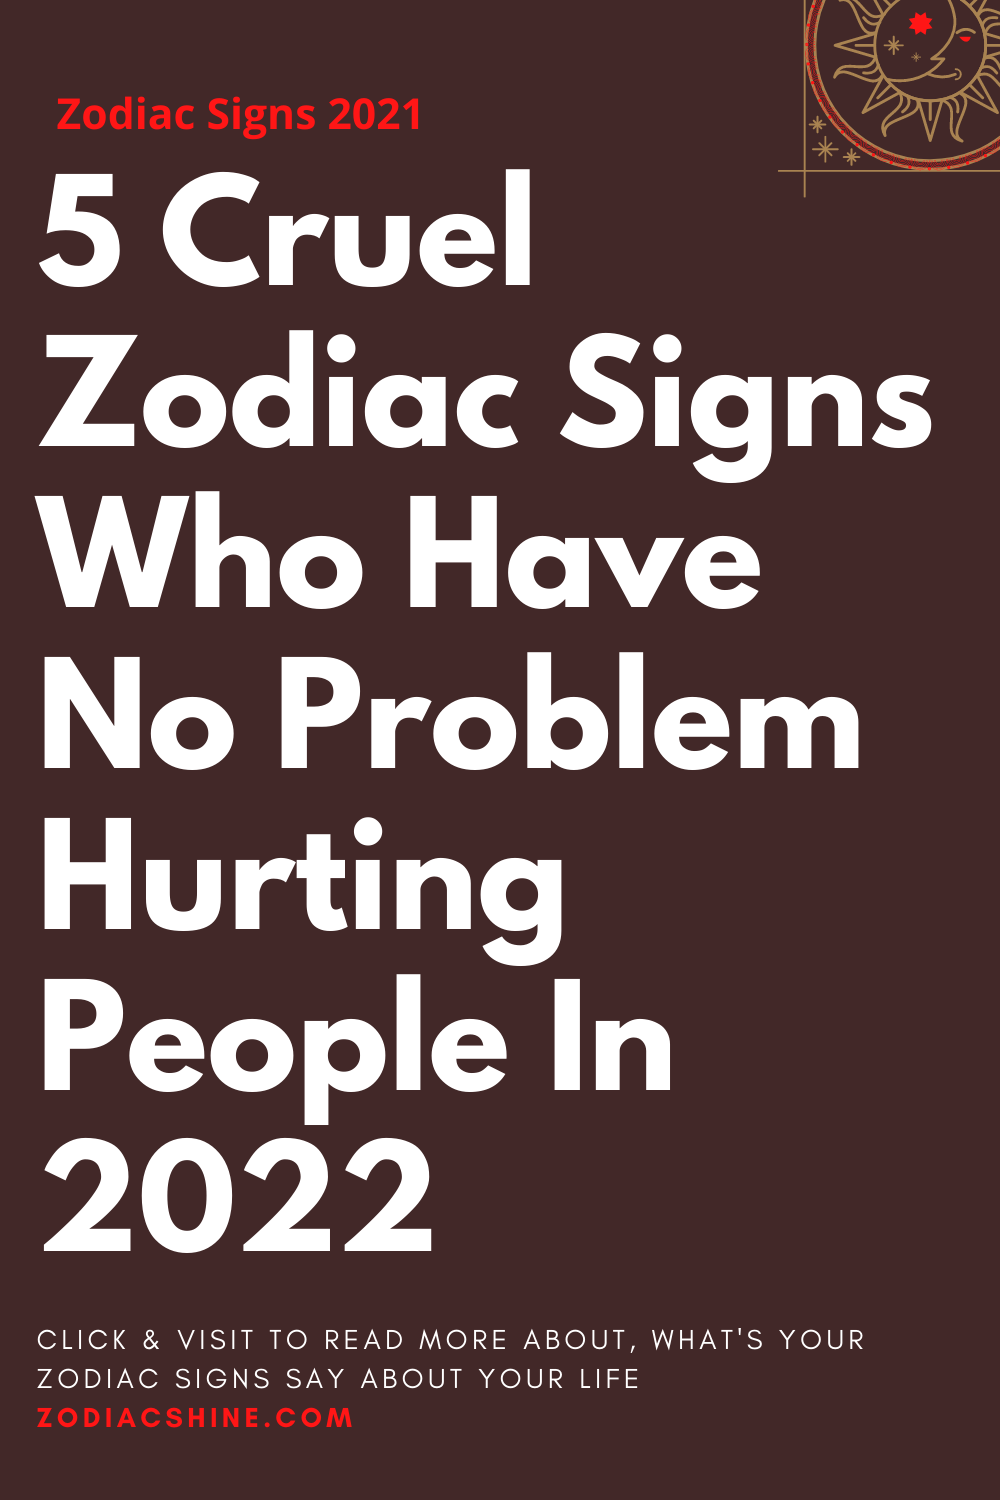 5 Cruel Zodiac Signs Who Have No Problem Hurting People In 2022